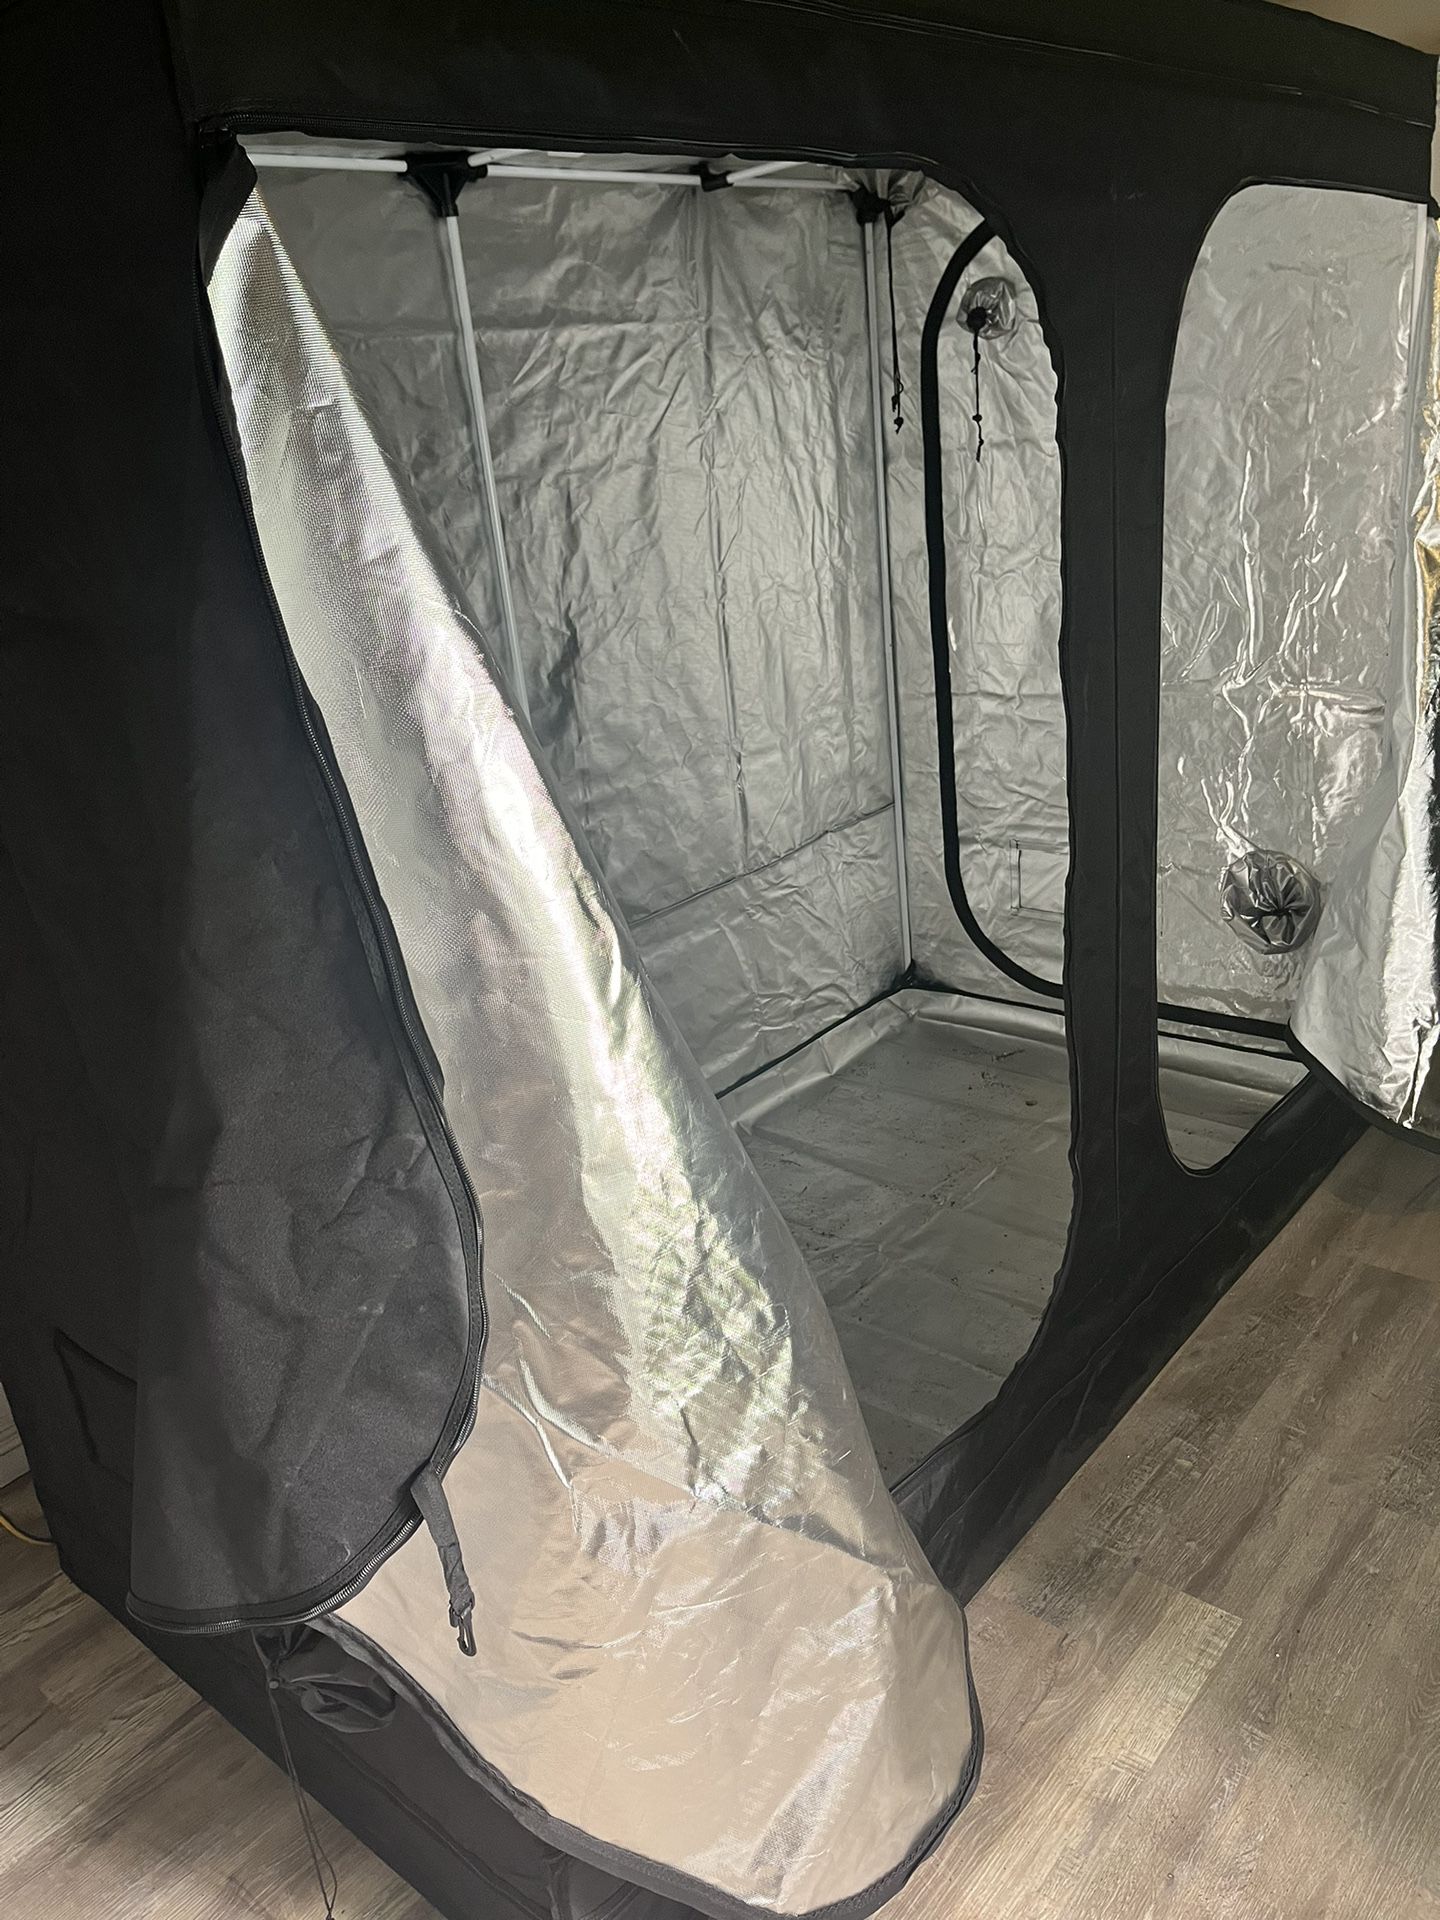 GREAT DEAL!!! 2 New Grow Tents 